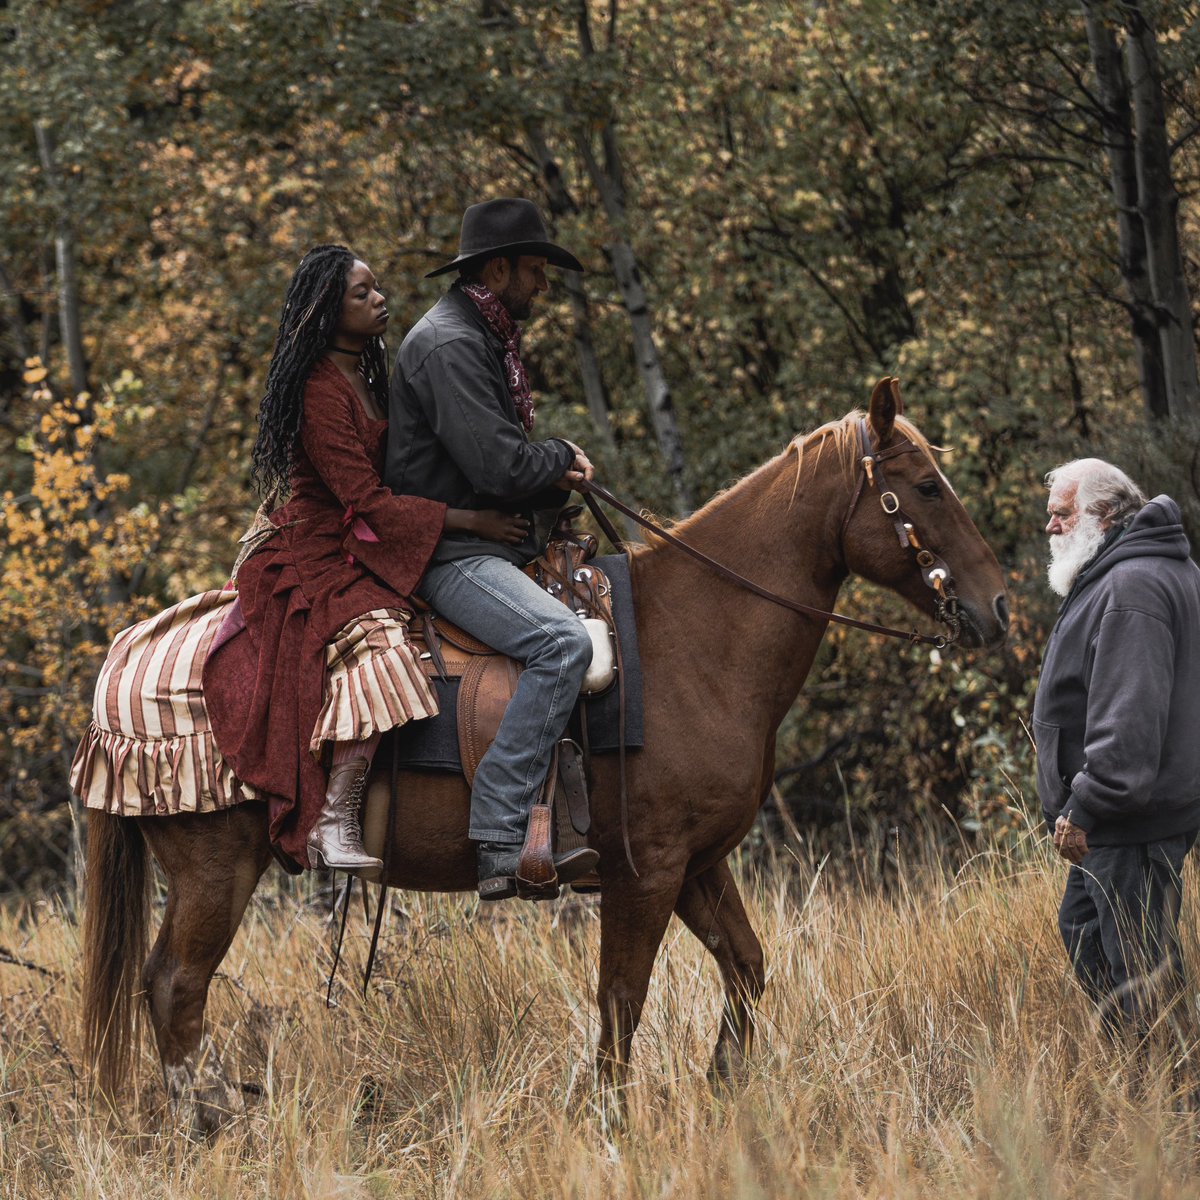 Behind the scenes, but make it on horseback. Mario Van Peebles' OUTLAW POSSE is now playing, only in theaters. Experience the film and all its Western glory today. Get tickets: fandango.com/outlaw-posse-2…